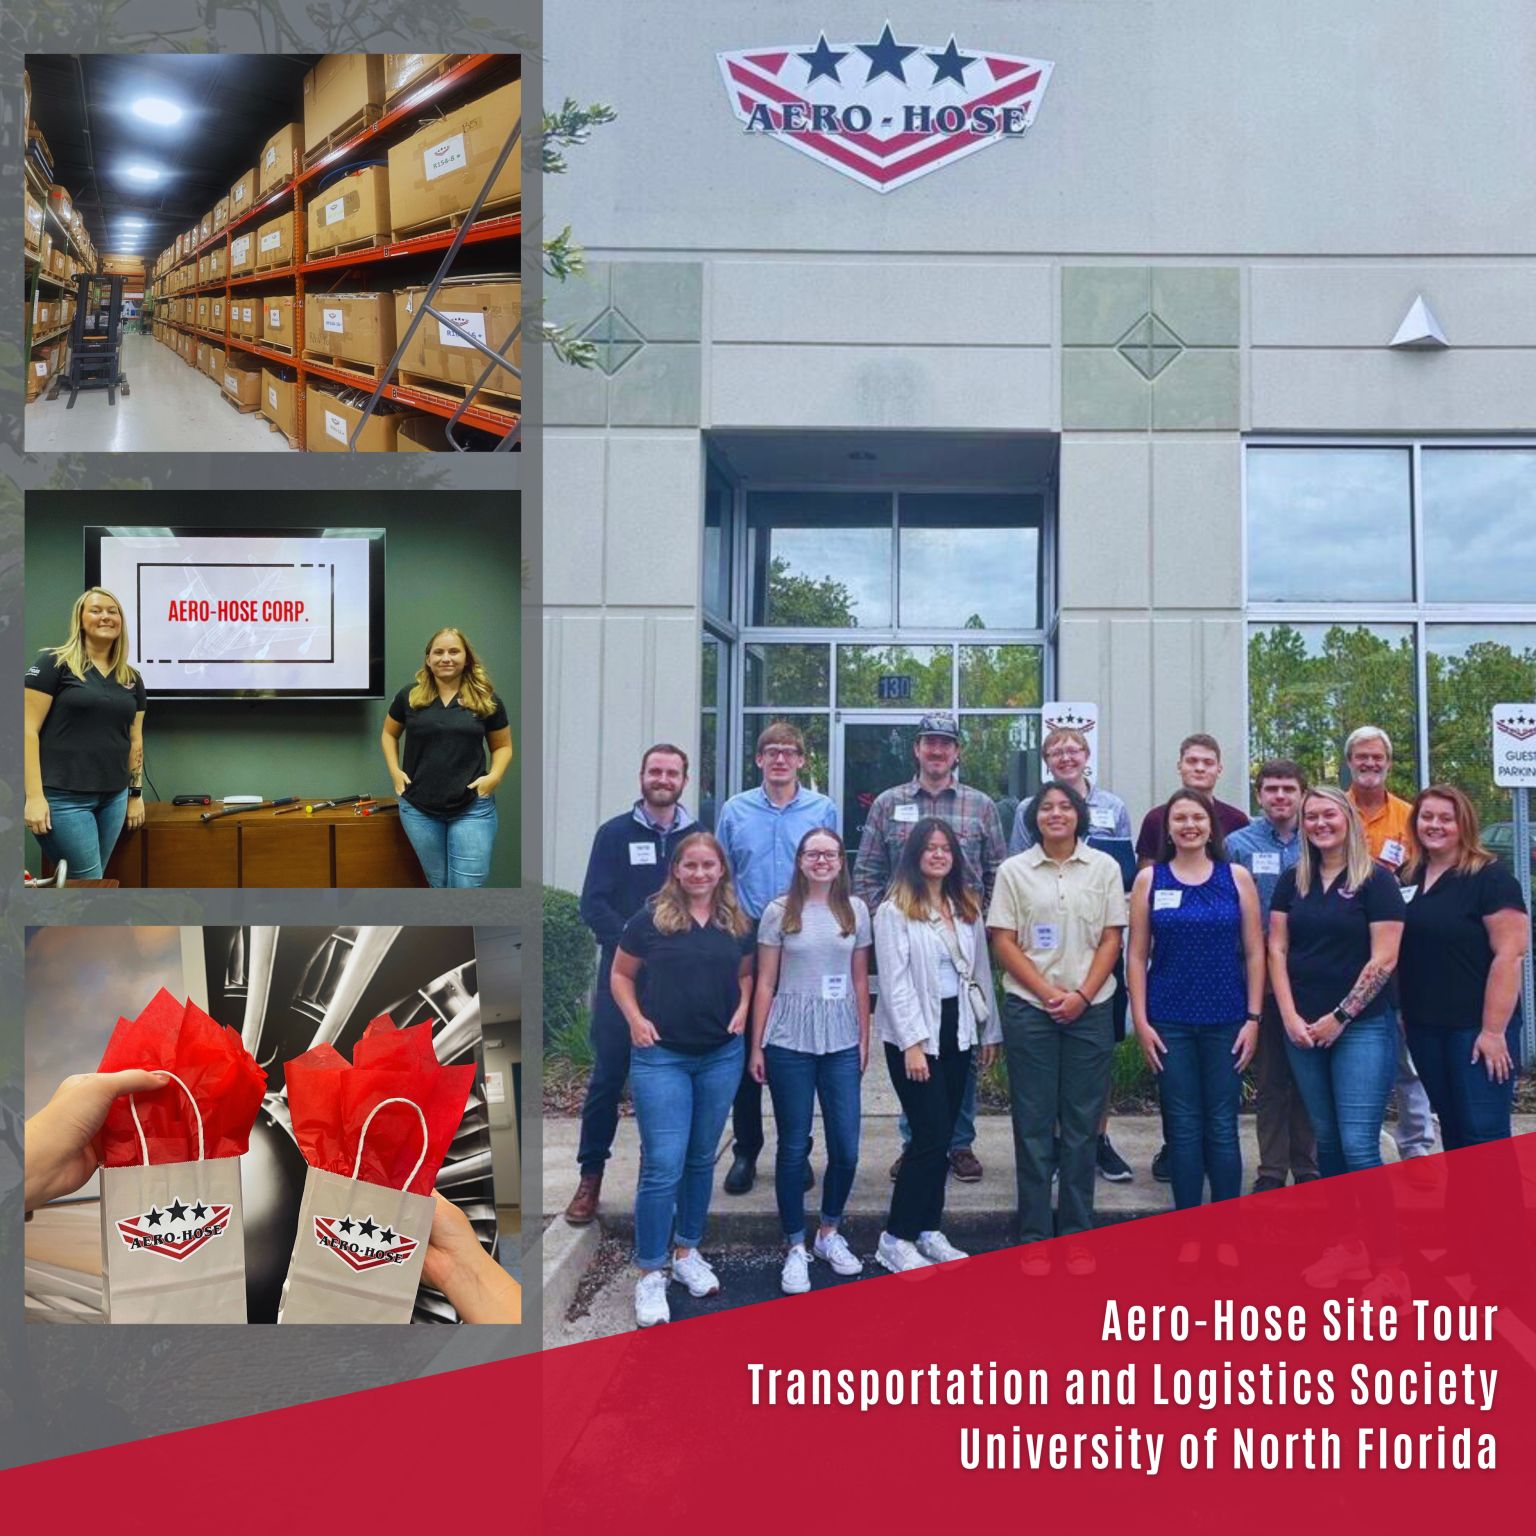 collage of auto draft site tour by the transportation and logistics society at the university of north florida, featuring group photo and inside views.